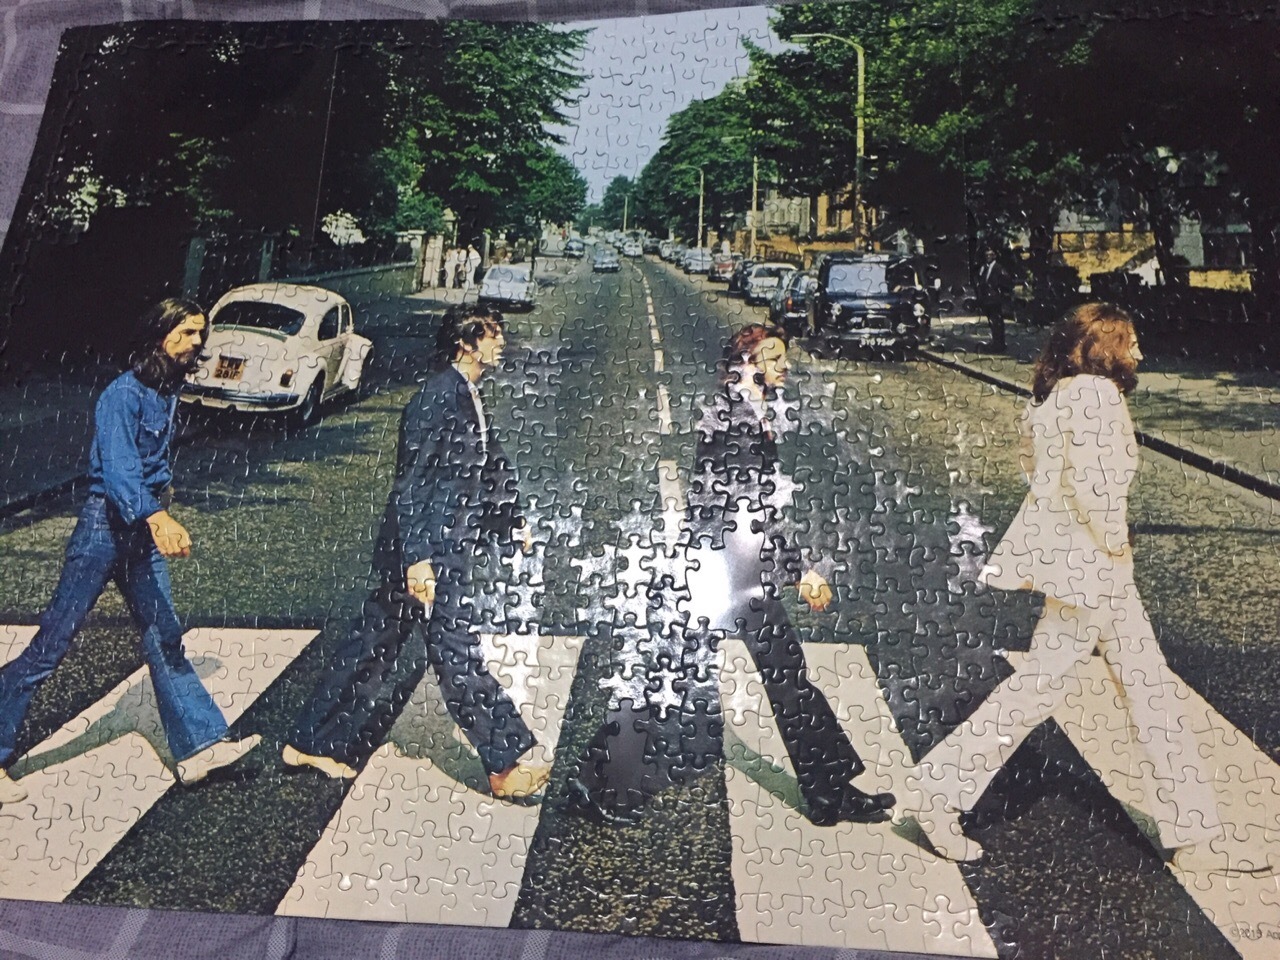 How I collected the Beatles - My, Puzzle, The beatles, Poster, Abbey Road, Paul McCartney, John Lennon, Ringo Starr, George Harrison, Longpost